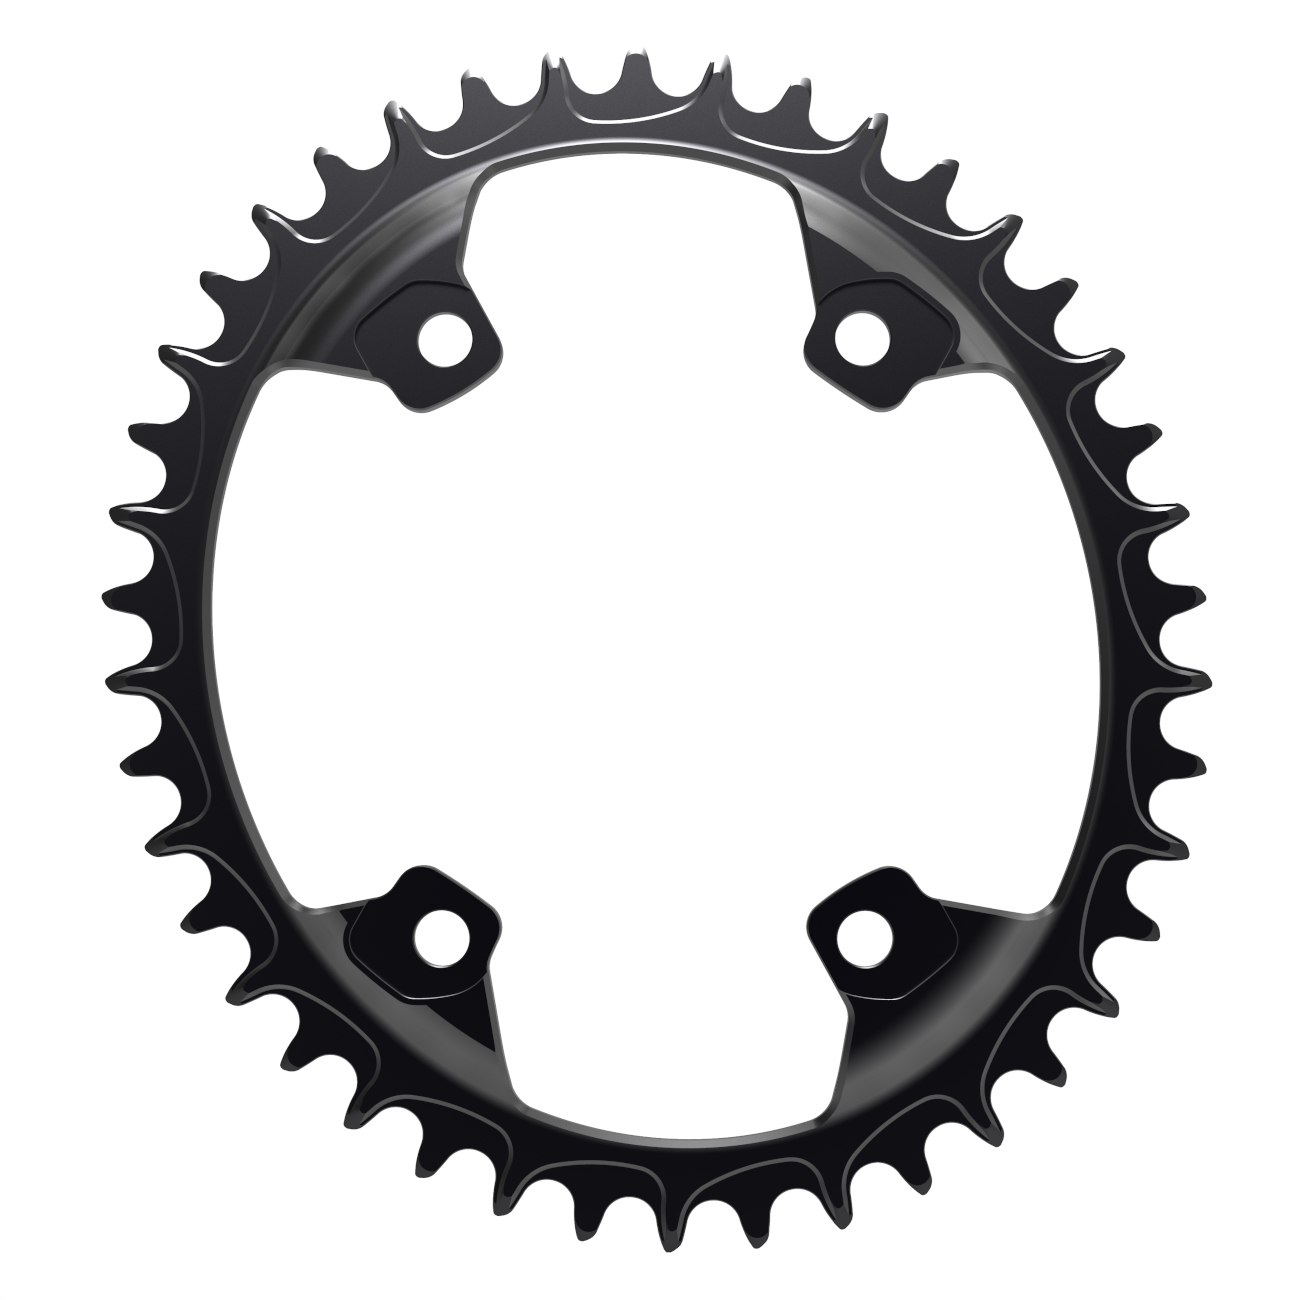 Image of Alugear Narrow Wide Road Chainring - Oval - for Shimano GRX Gravel 110 BCD Asymmetric - 4-Bolt